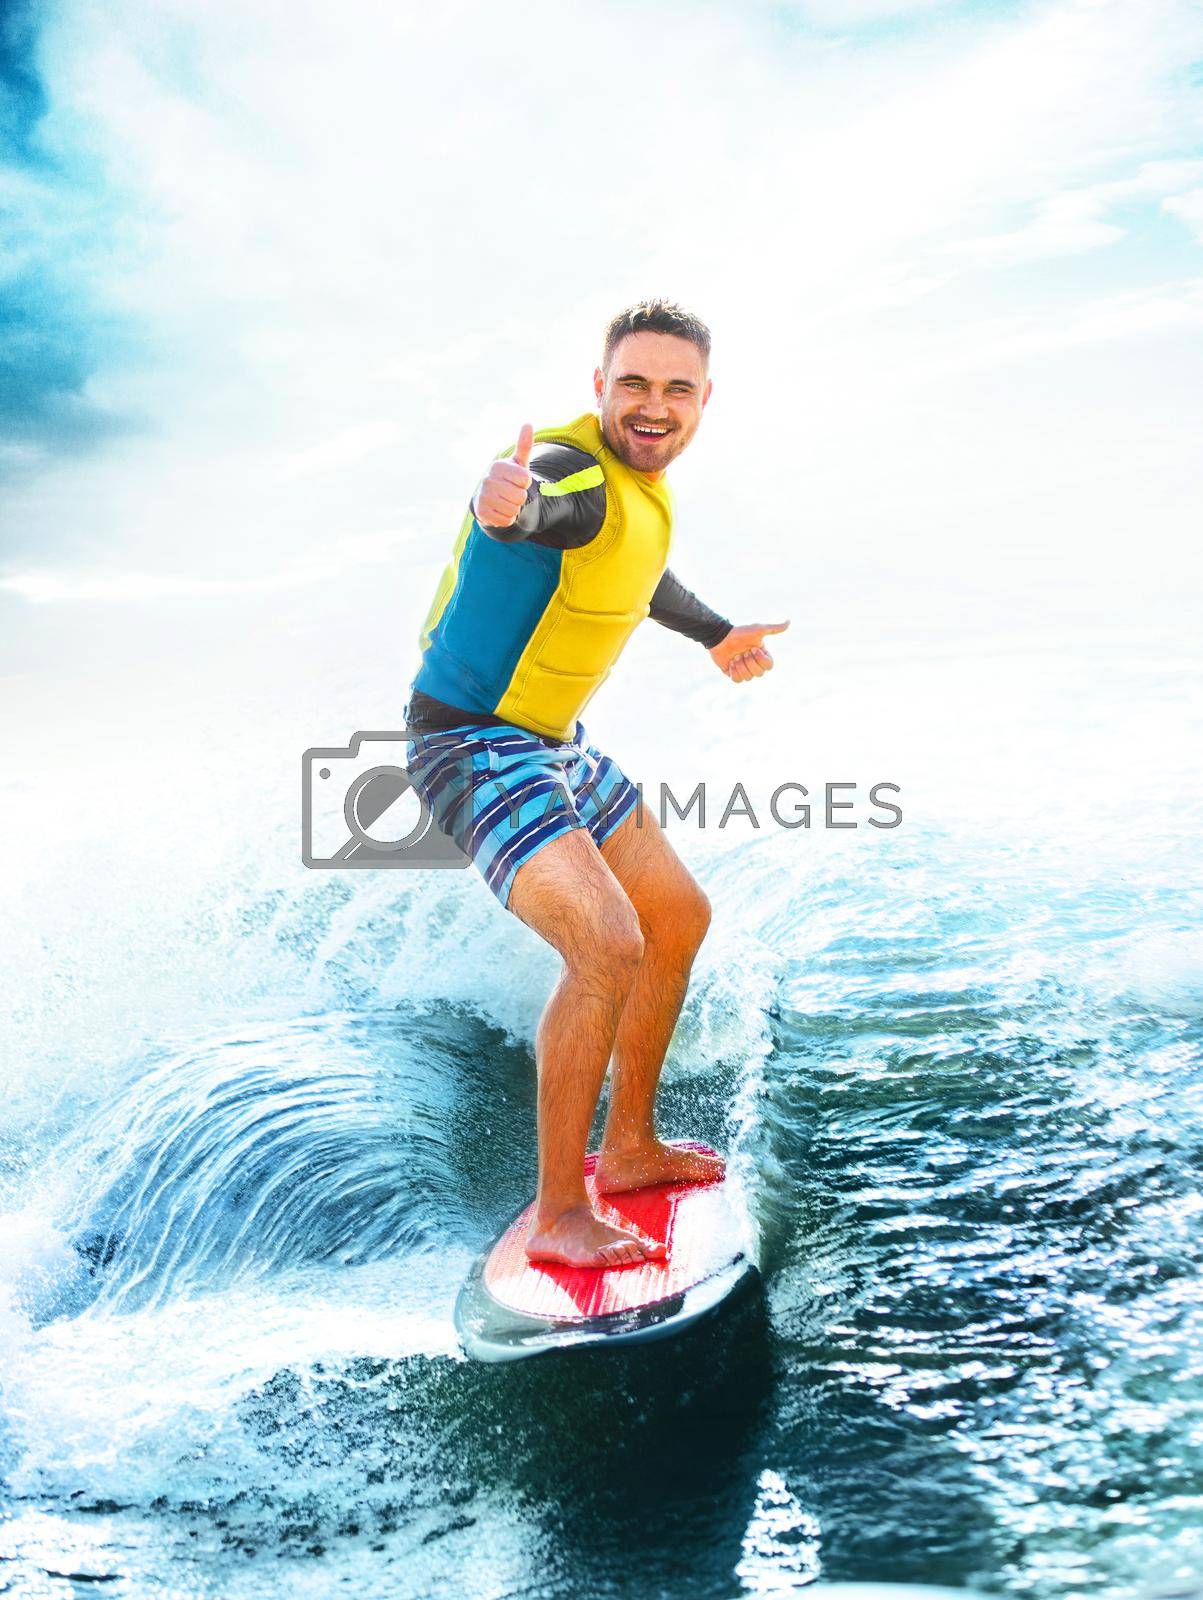 Royalty free image of Surfing, blue ocean. Young Man show thumbs up on wakeboard. by MikeOrlov